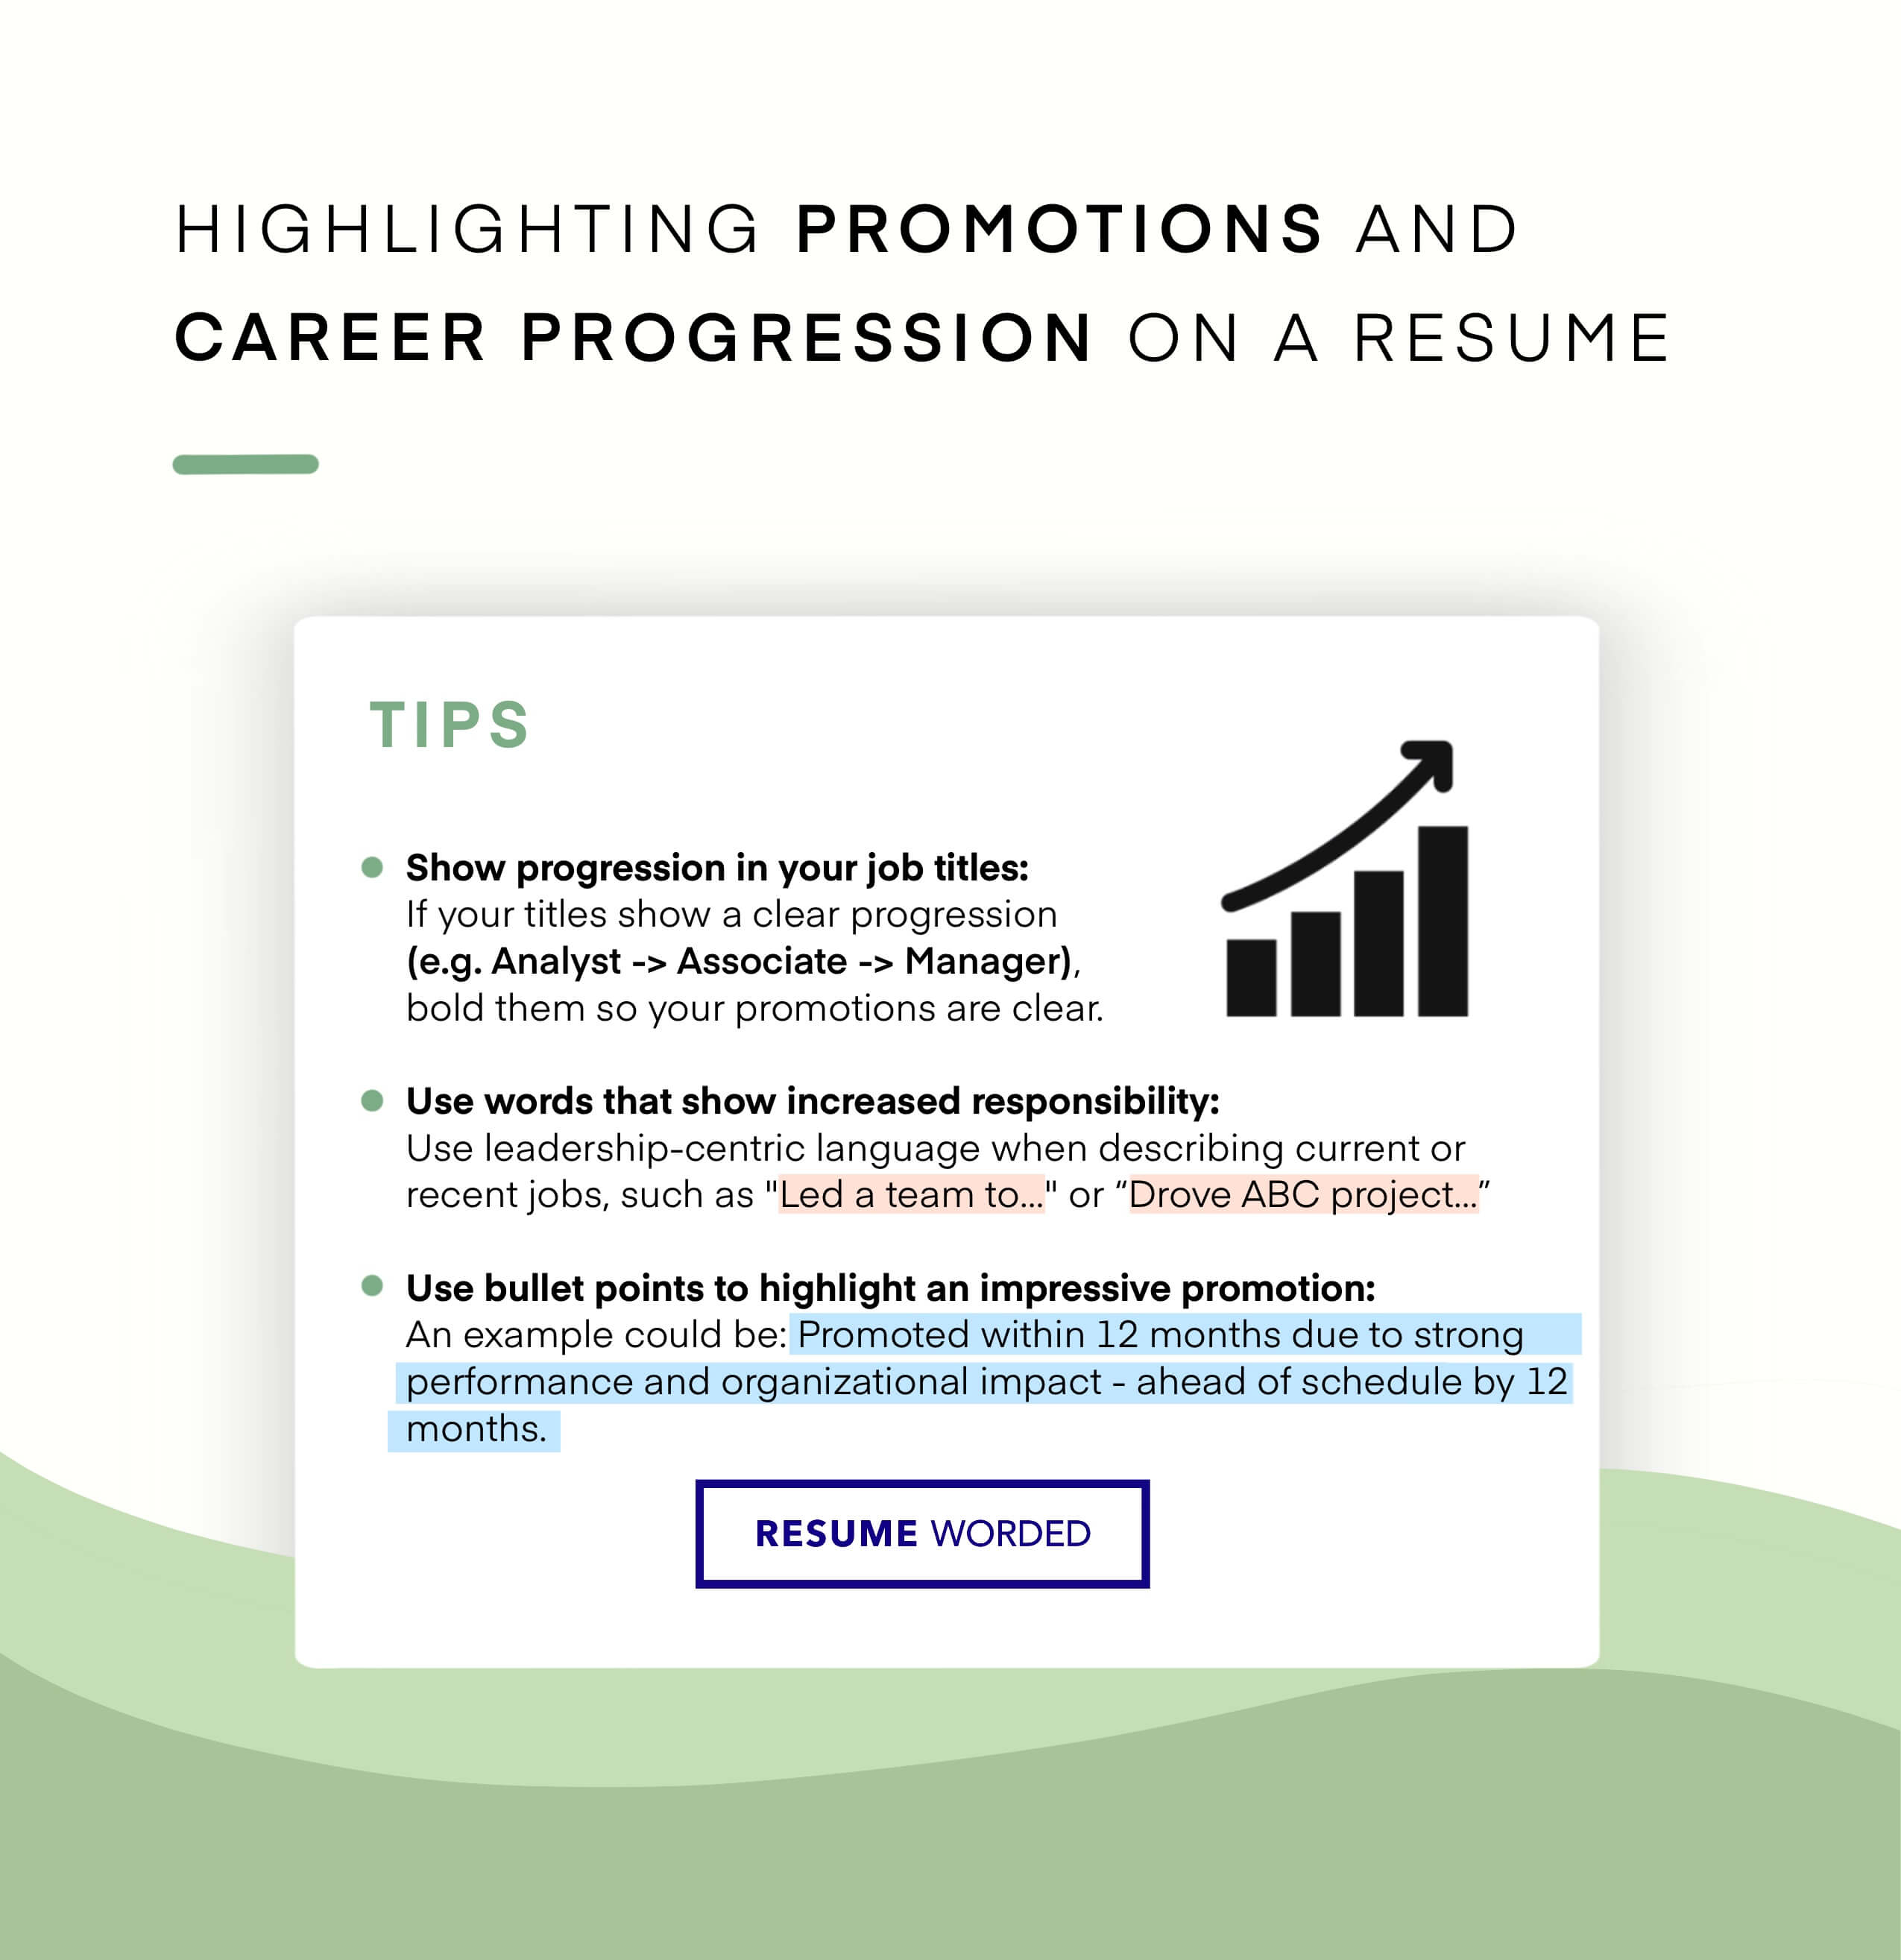 Demonstrates professional growth through promotions - Senior Financial Analyst Resume